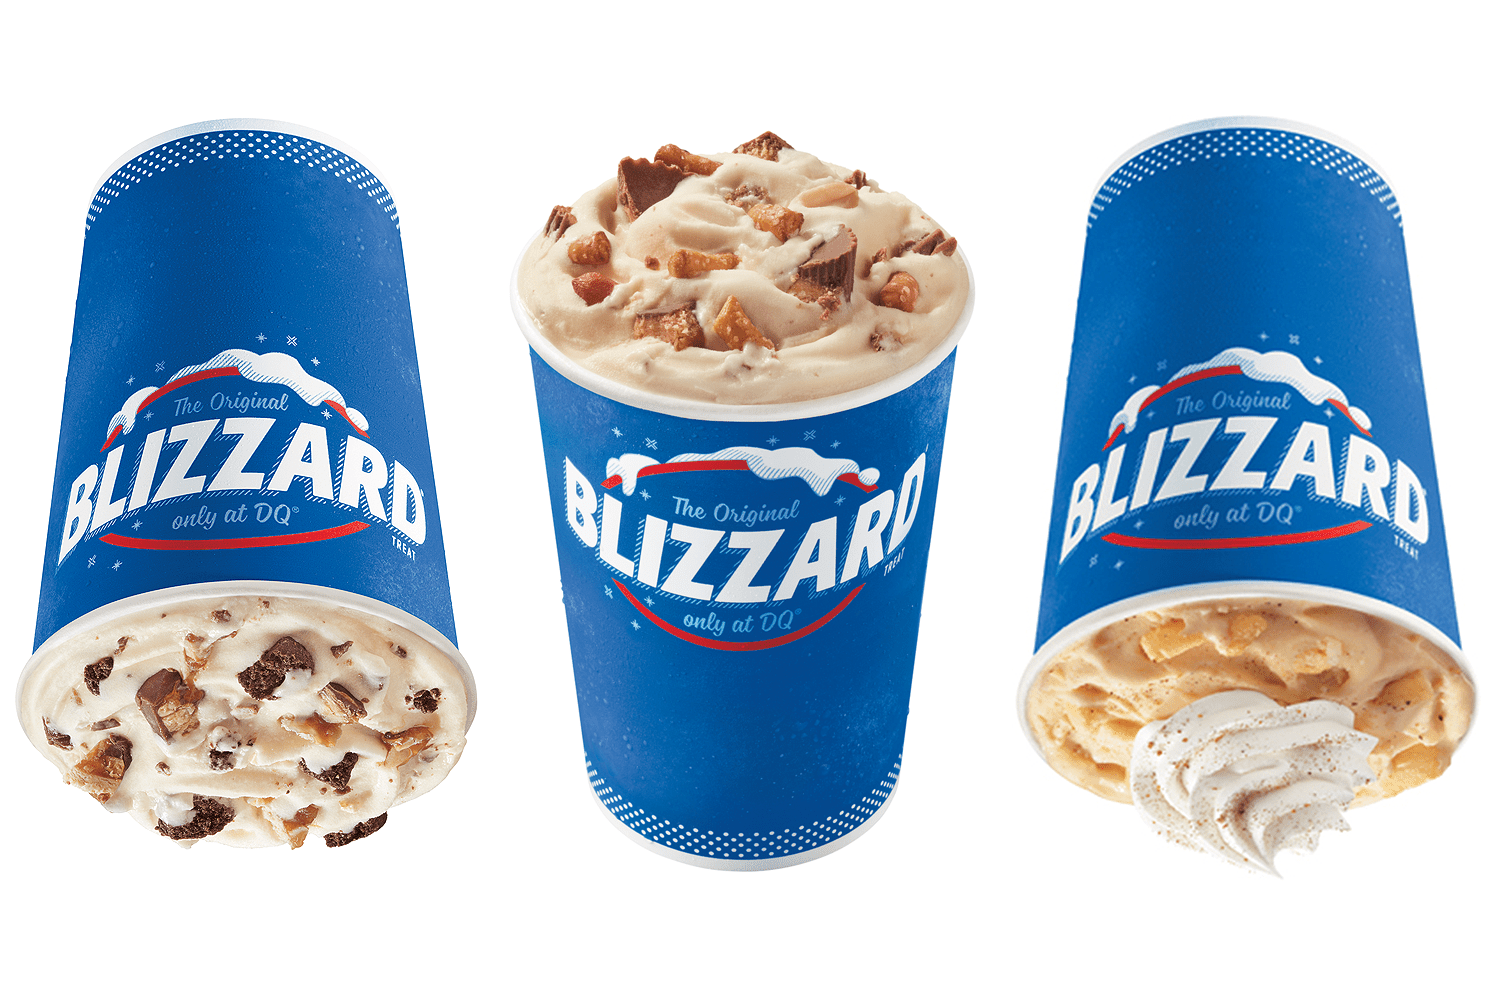 dairy-queen-fall-blizzards-083022-5-08a1edc563eb48a2a9abad8cecac0a21